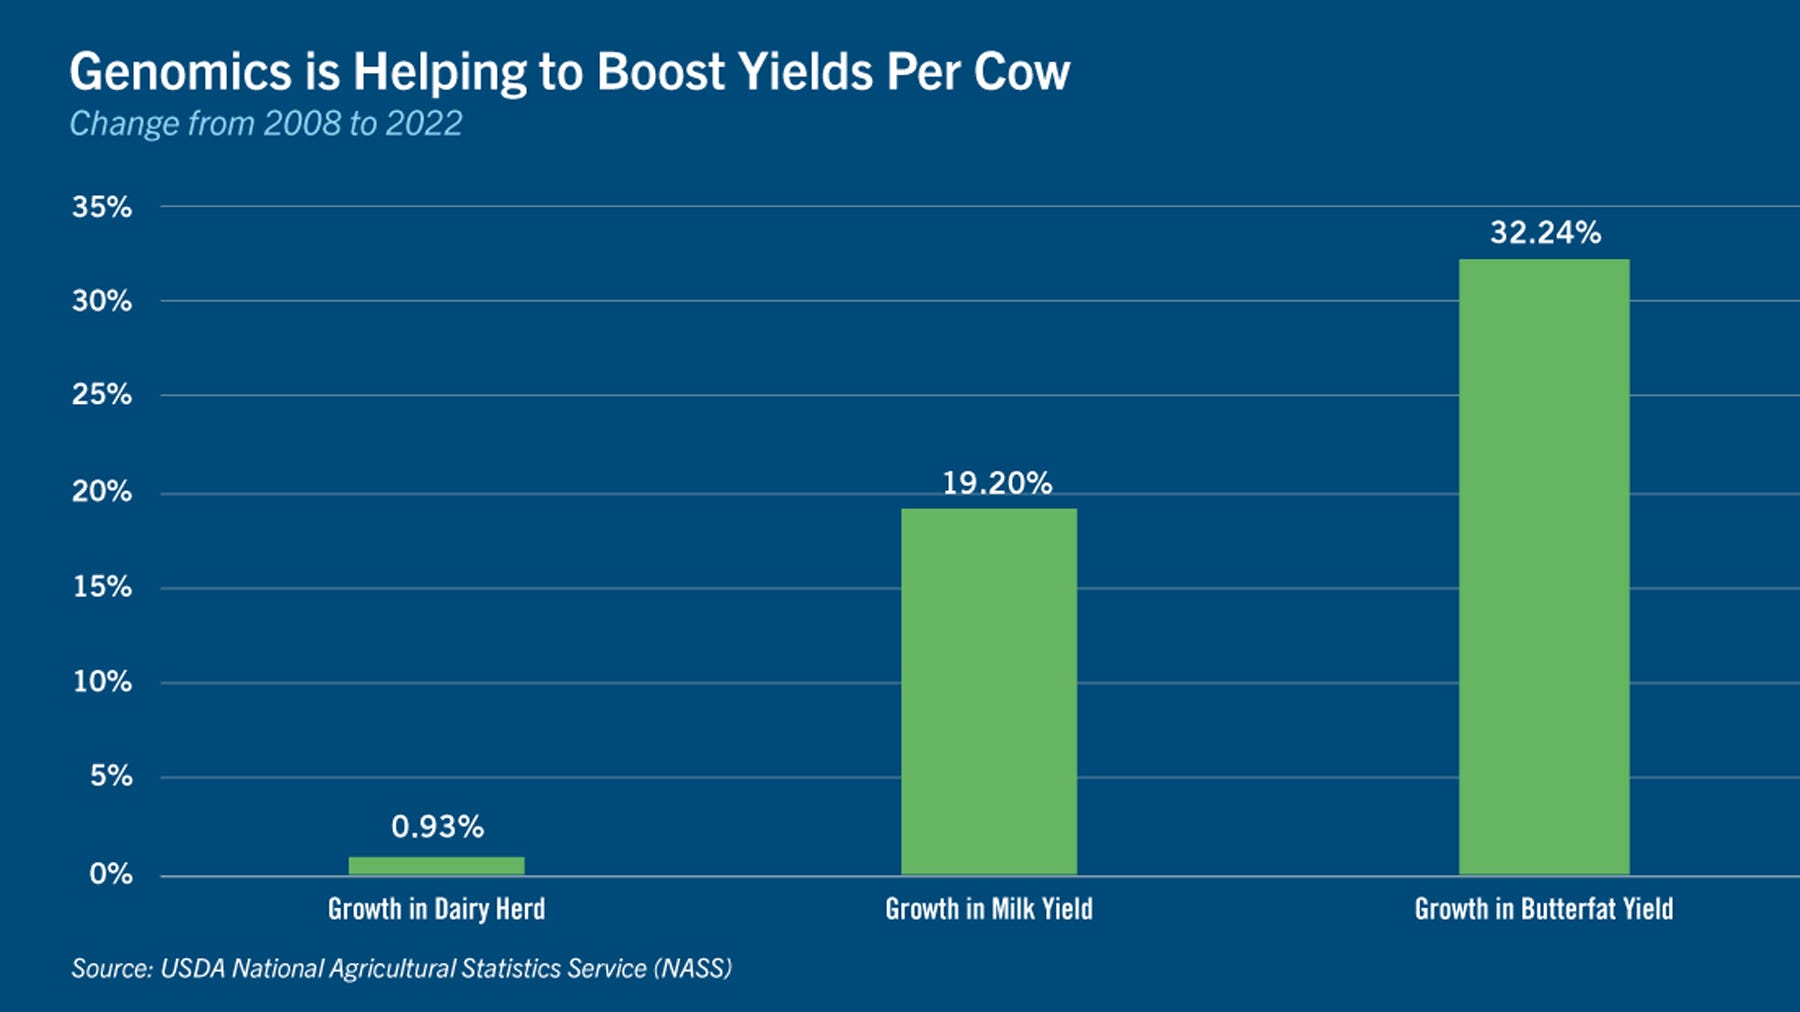 Genomics is helping to boost yields per cow bar chart